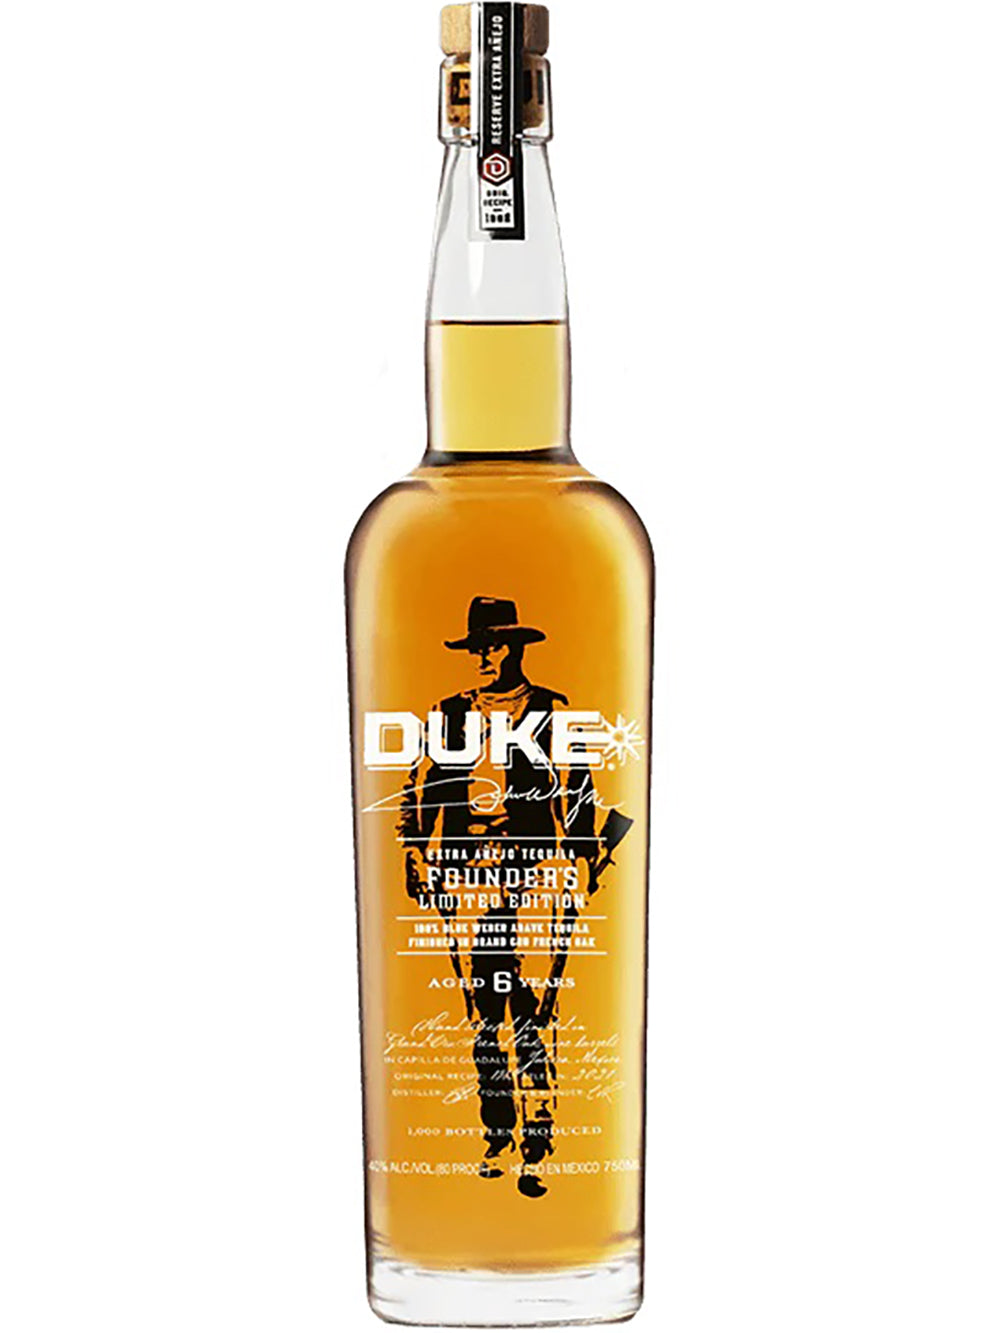 Duke Extra Anejo Tequila 6 Year Founder's Reserve